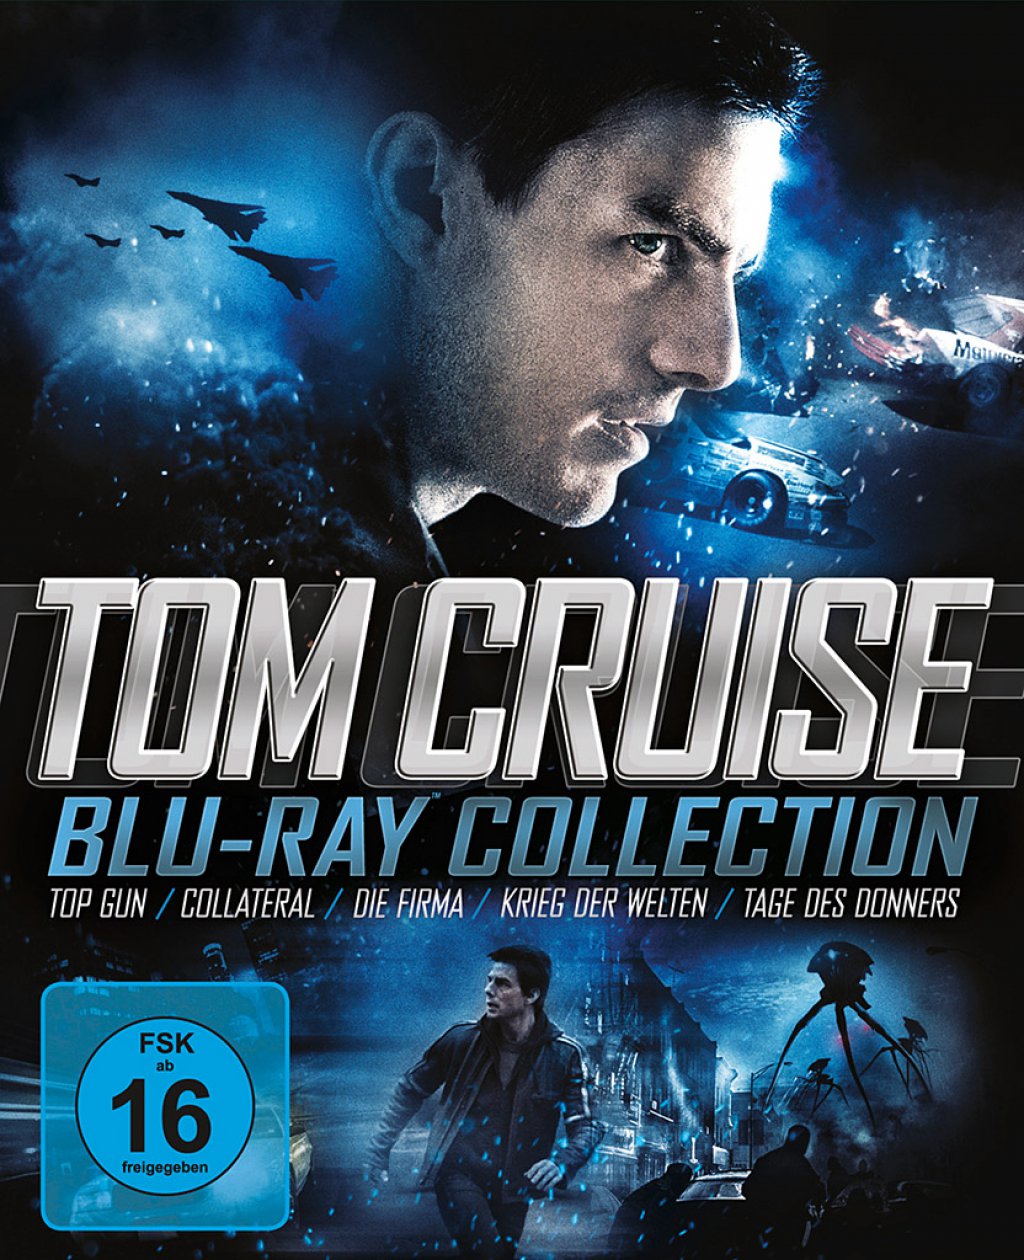 tom cruise collection blu ray